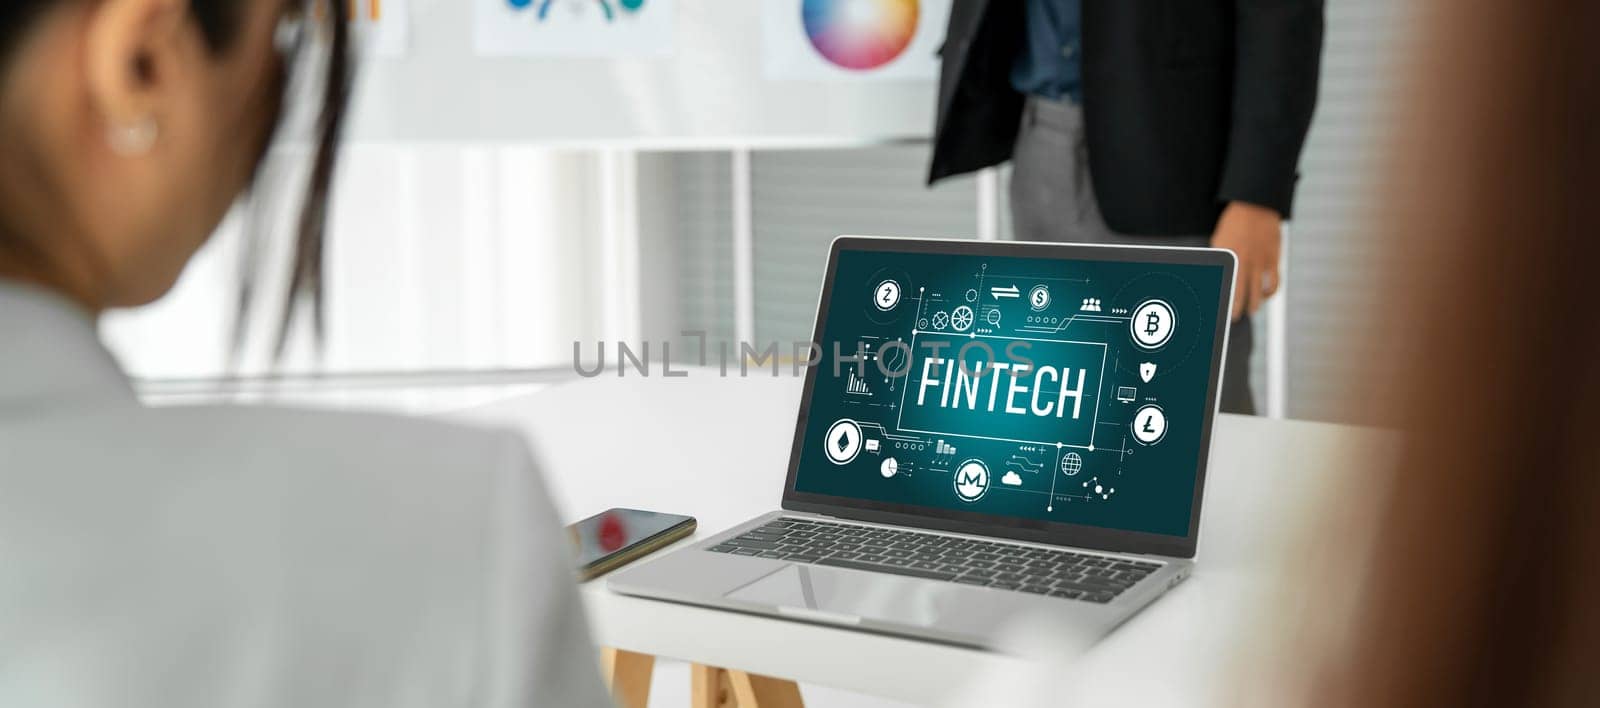 Fintech financial technology software for modish business by biancoblue